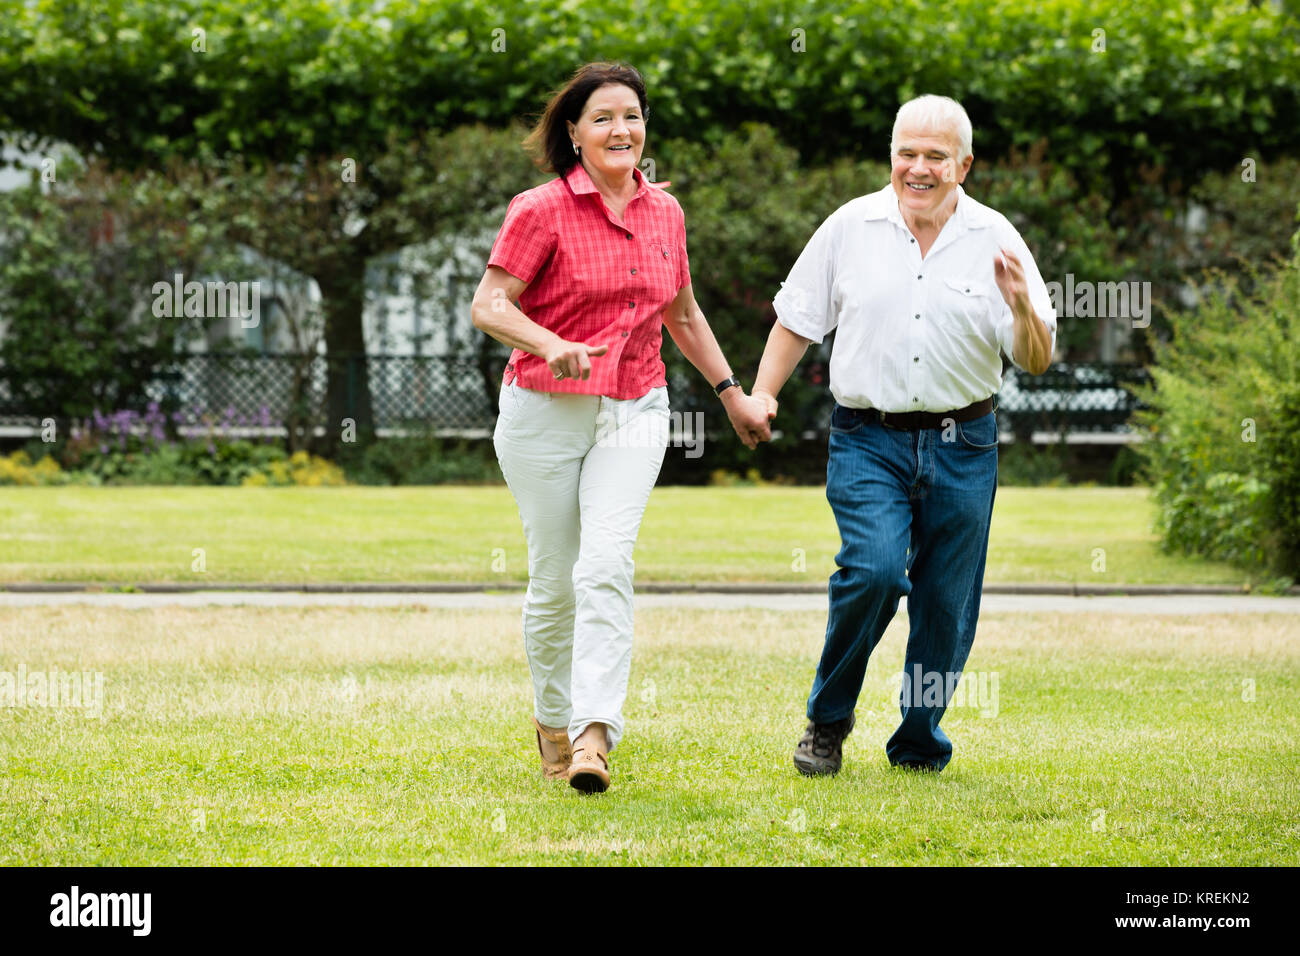 Couple Running In Park Holding Hands Stock Photo